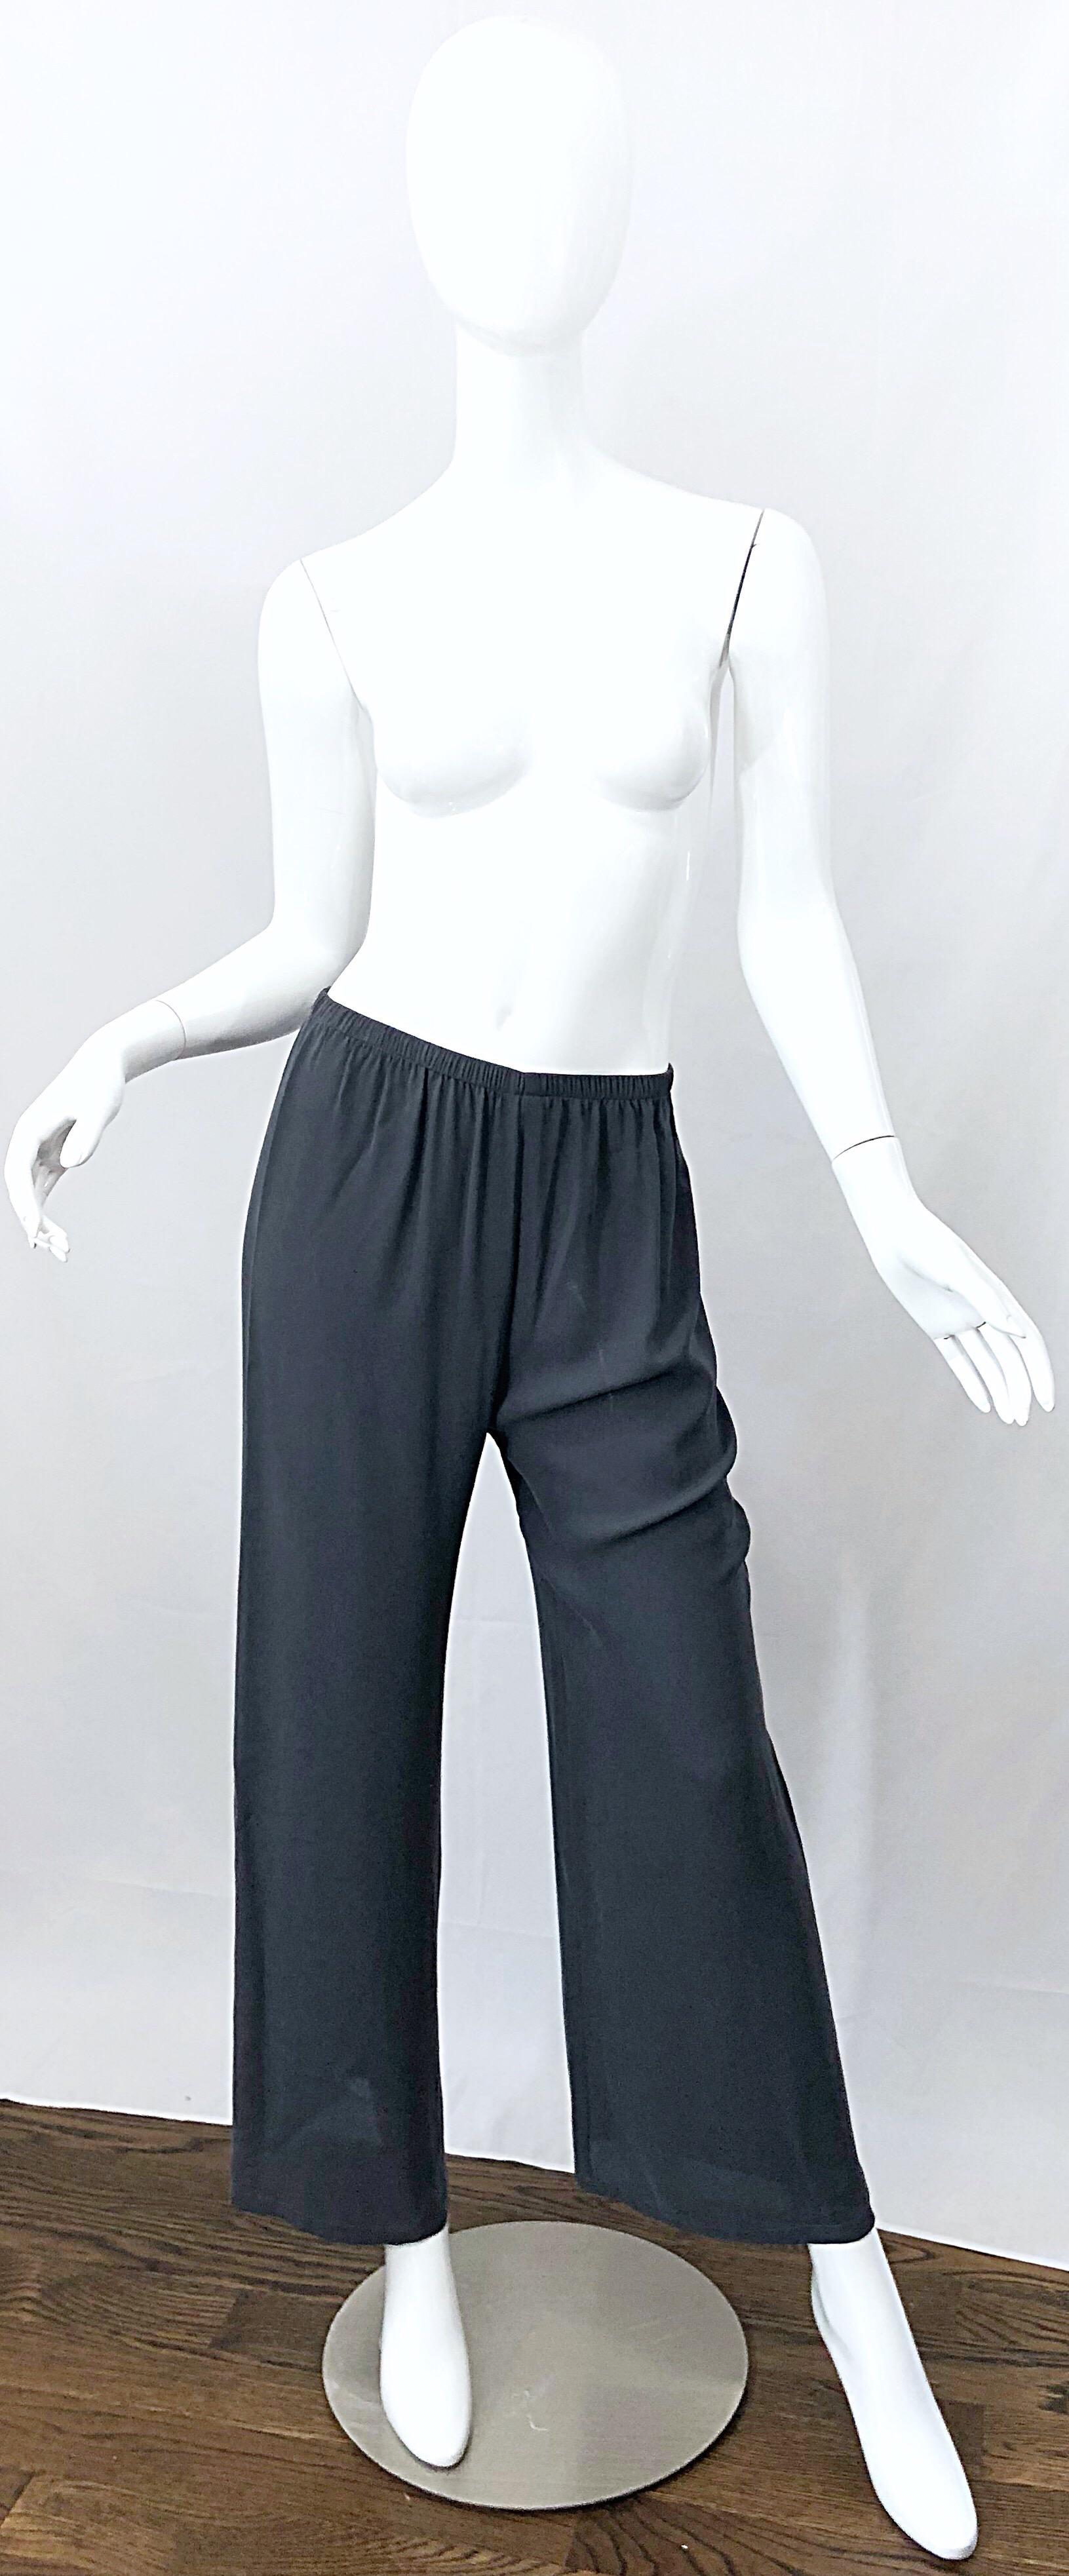 Chic late 1990s CALVIN KLEIN COLLECTION gray silk wide leg pajama style pants! Comfortable, yet very stylish and versatile. Elastic waistband stretches to fit. Can easily be dressed up or down, and great all year. Perfect with a crisp blouse, crop